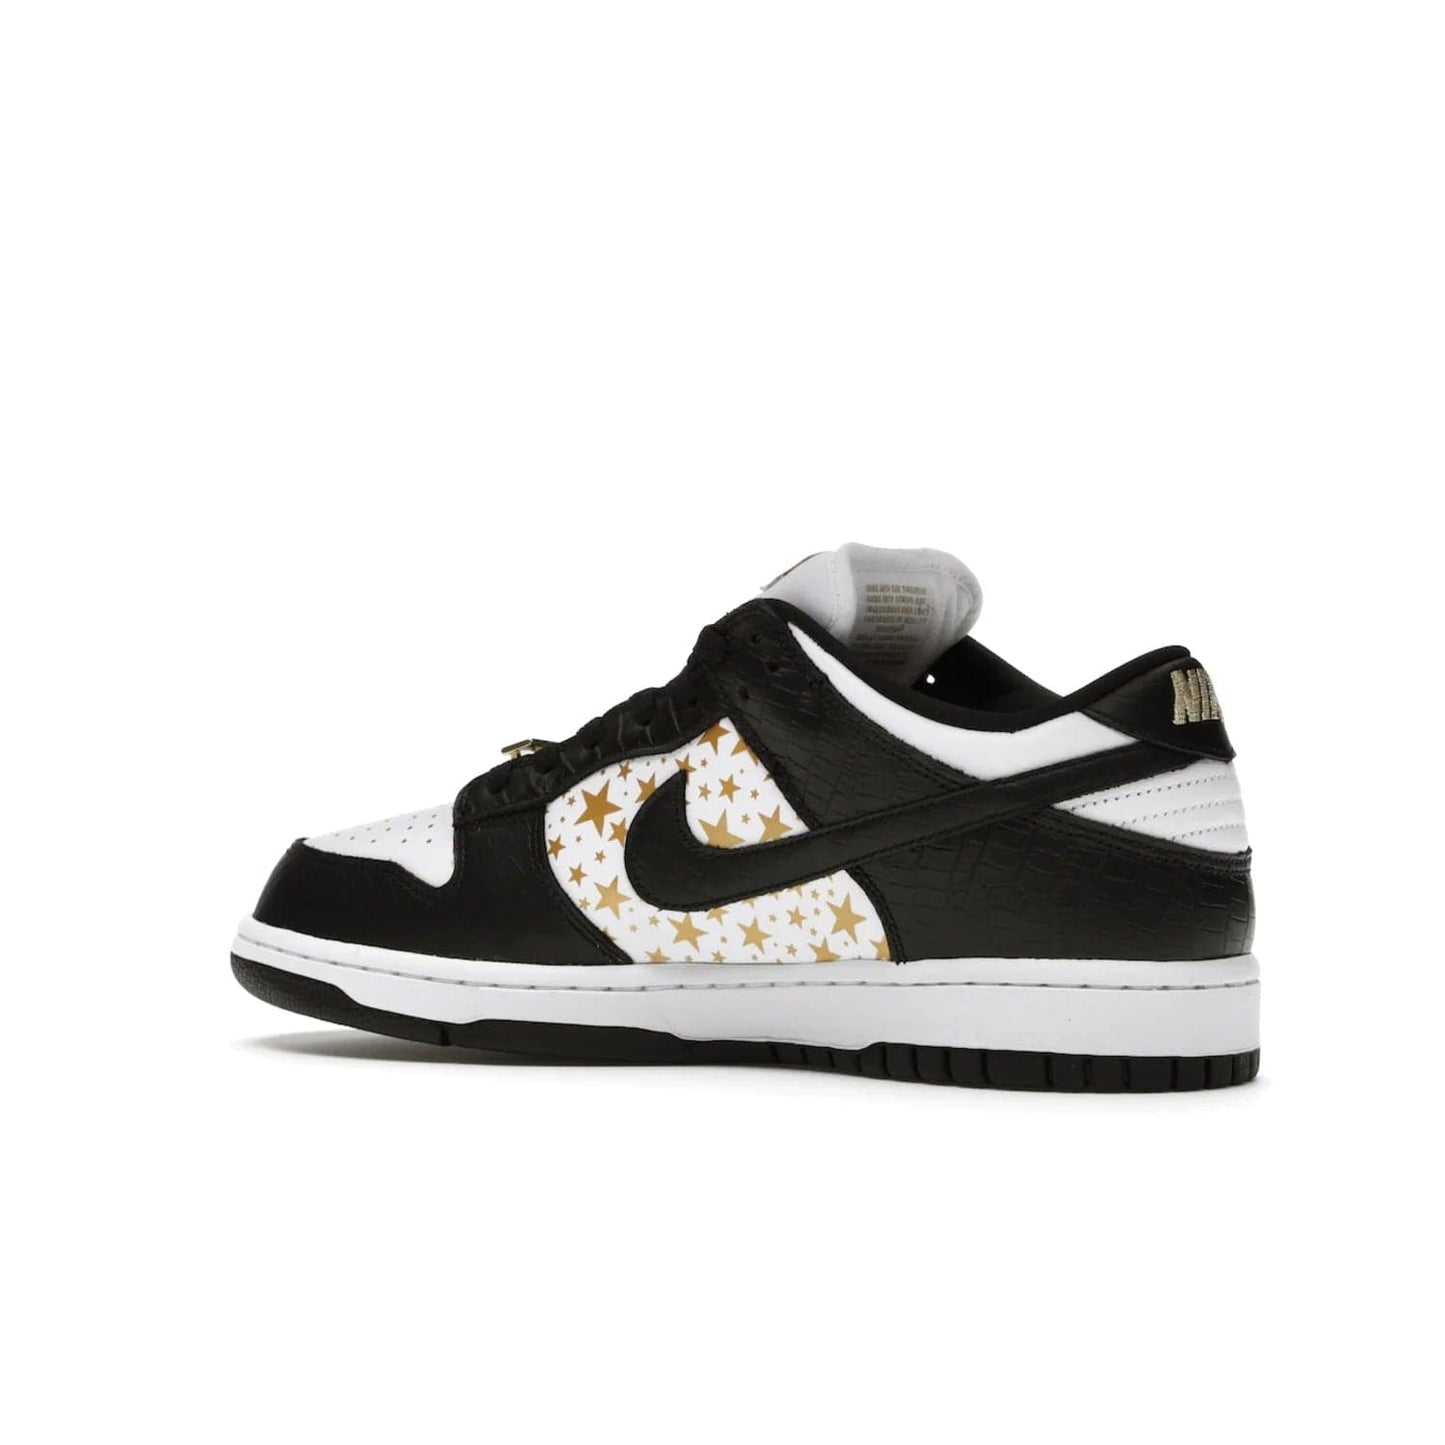 Nike SB Dunk Low Supreme Stars Black (2021) - Image 22 - Only at www.BallersClubKickz.com - Retro style and signature details make the Nike SB Dunk Low Supreme Black a must-have. This special edition shoe features a white leather upper and black croc skin overlays complemented by gold stars and deubré. Enjoy a piece of SB history and grab yours today.